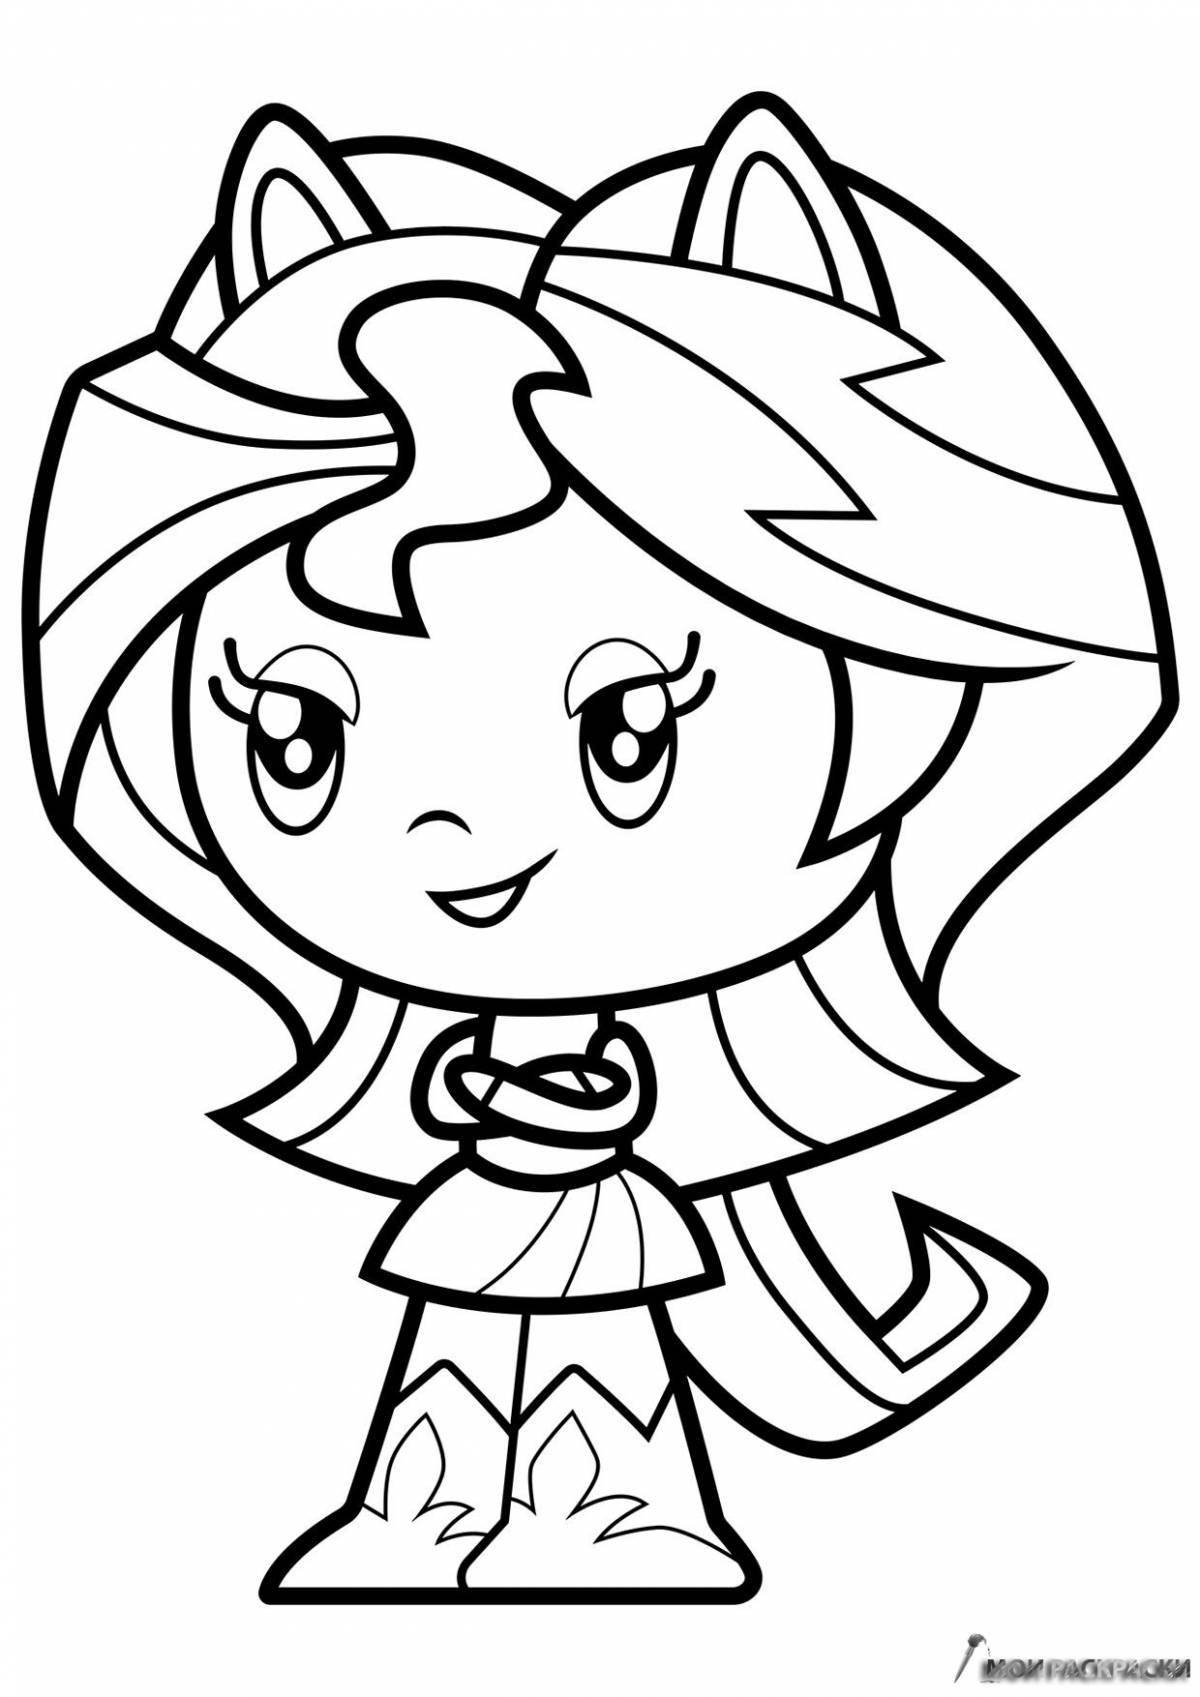 Coloring page shining cute pony